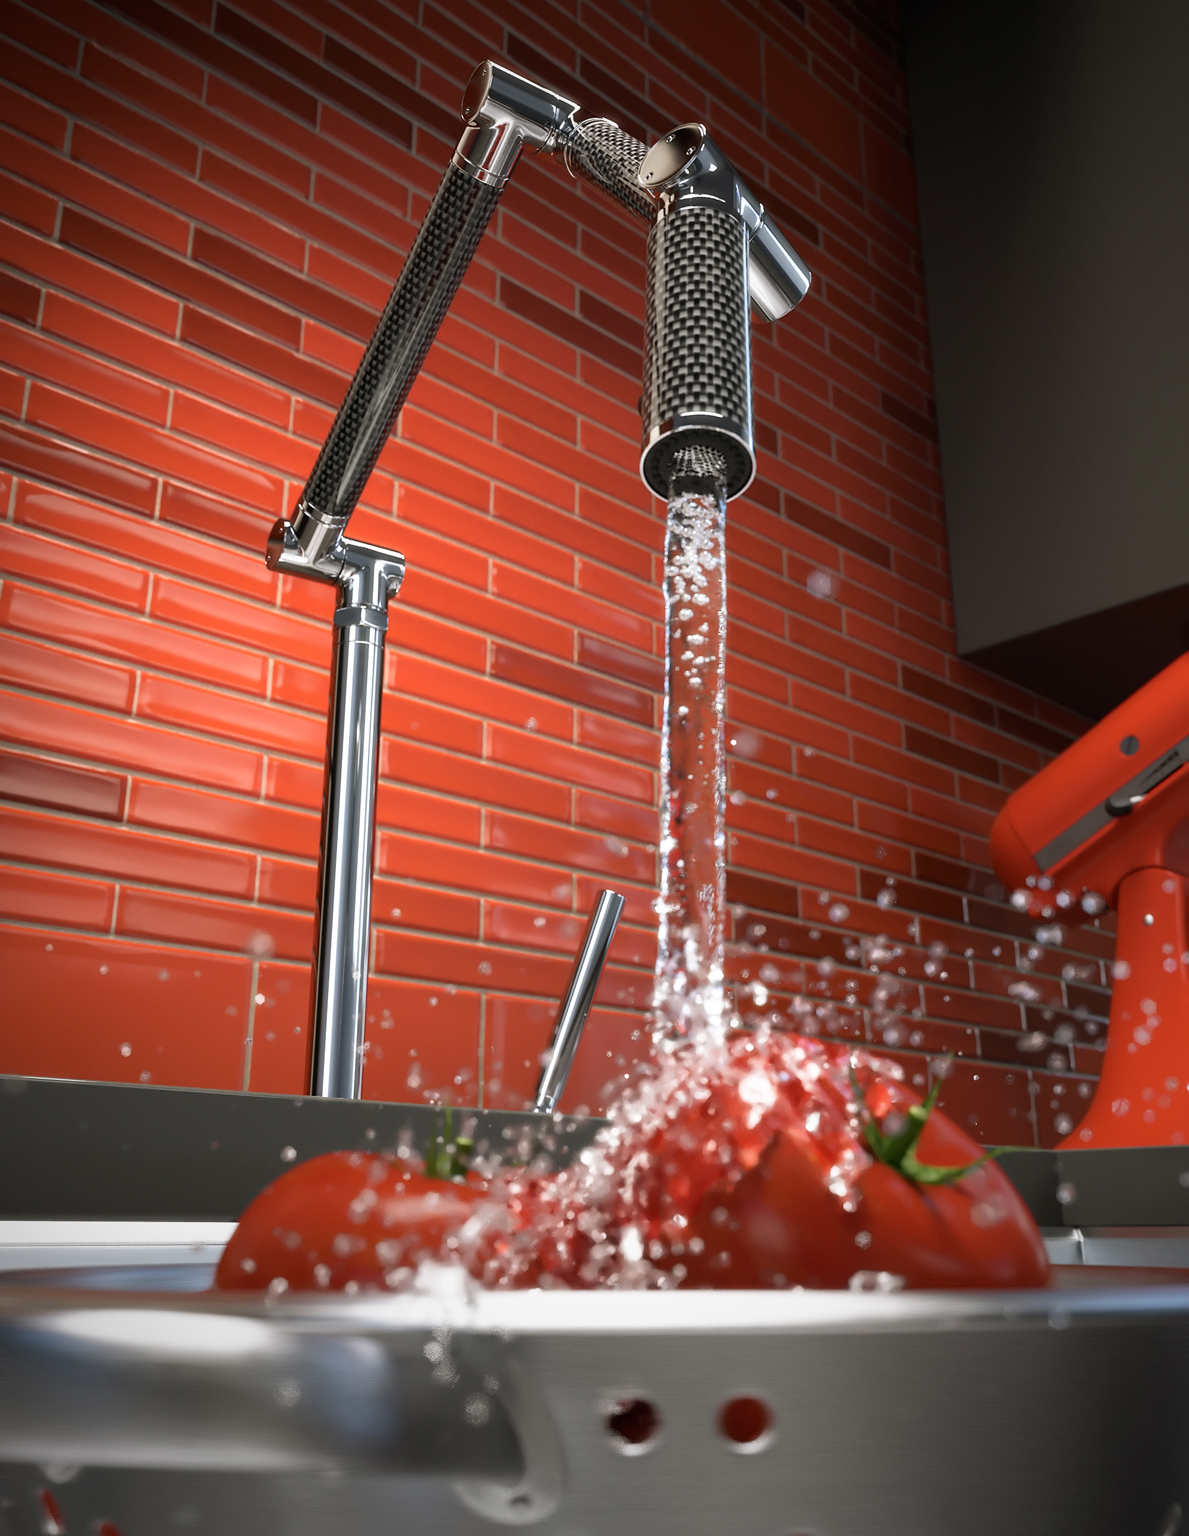 kitchen 3D Rendering CGI Kitchen Appliance appliance Architectural rendering Tomato Faucet